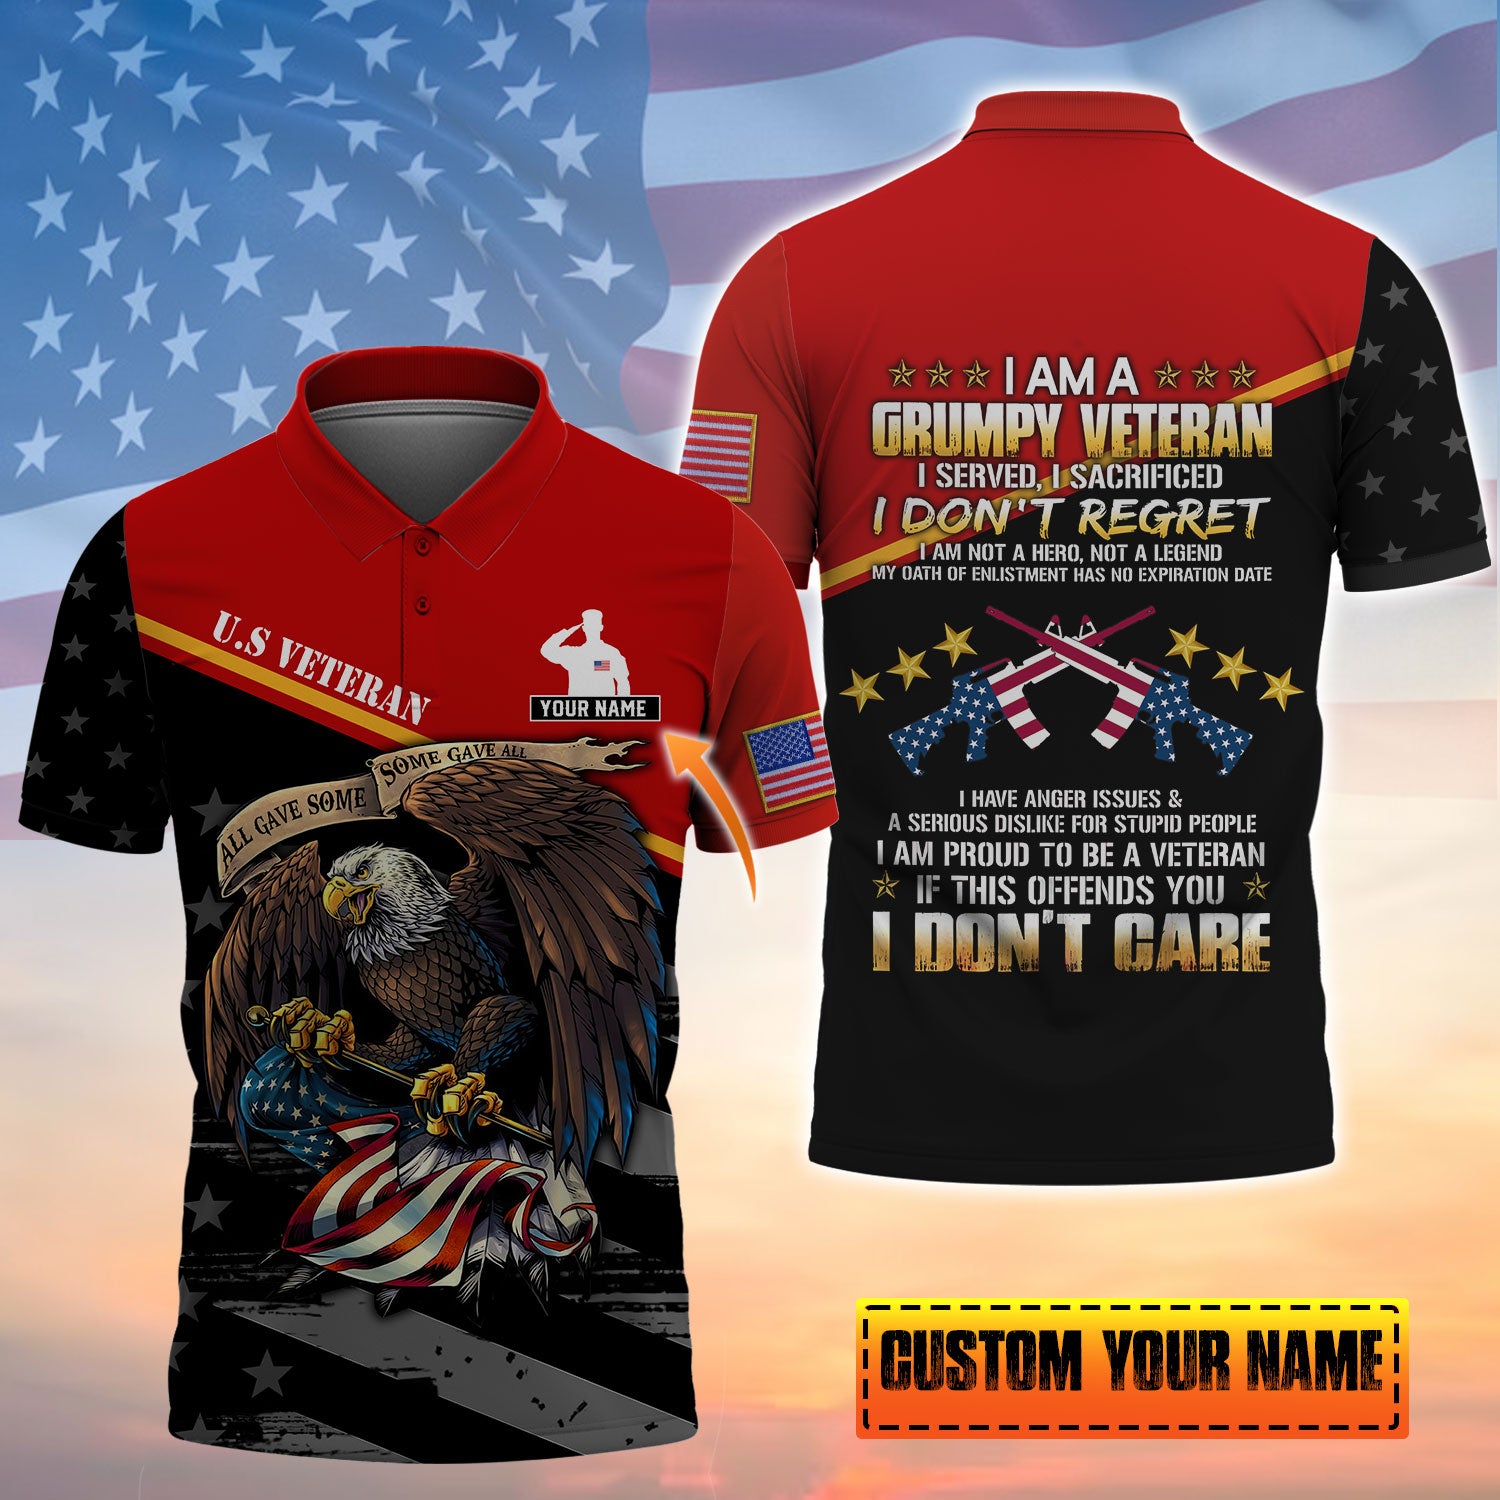 All Gave Some - Some Gave All - I Am Grumpy Veteran - I Served, I Sacrificed, I Don't Regret - Customized U.S. Veteran Polo Shirt, Gift For Veterans